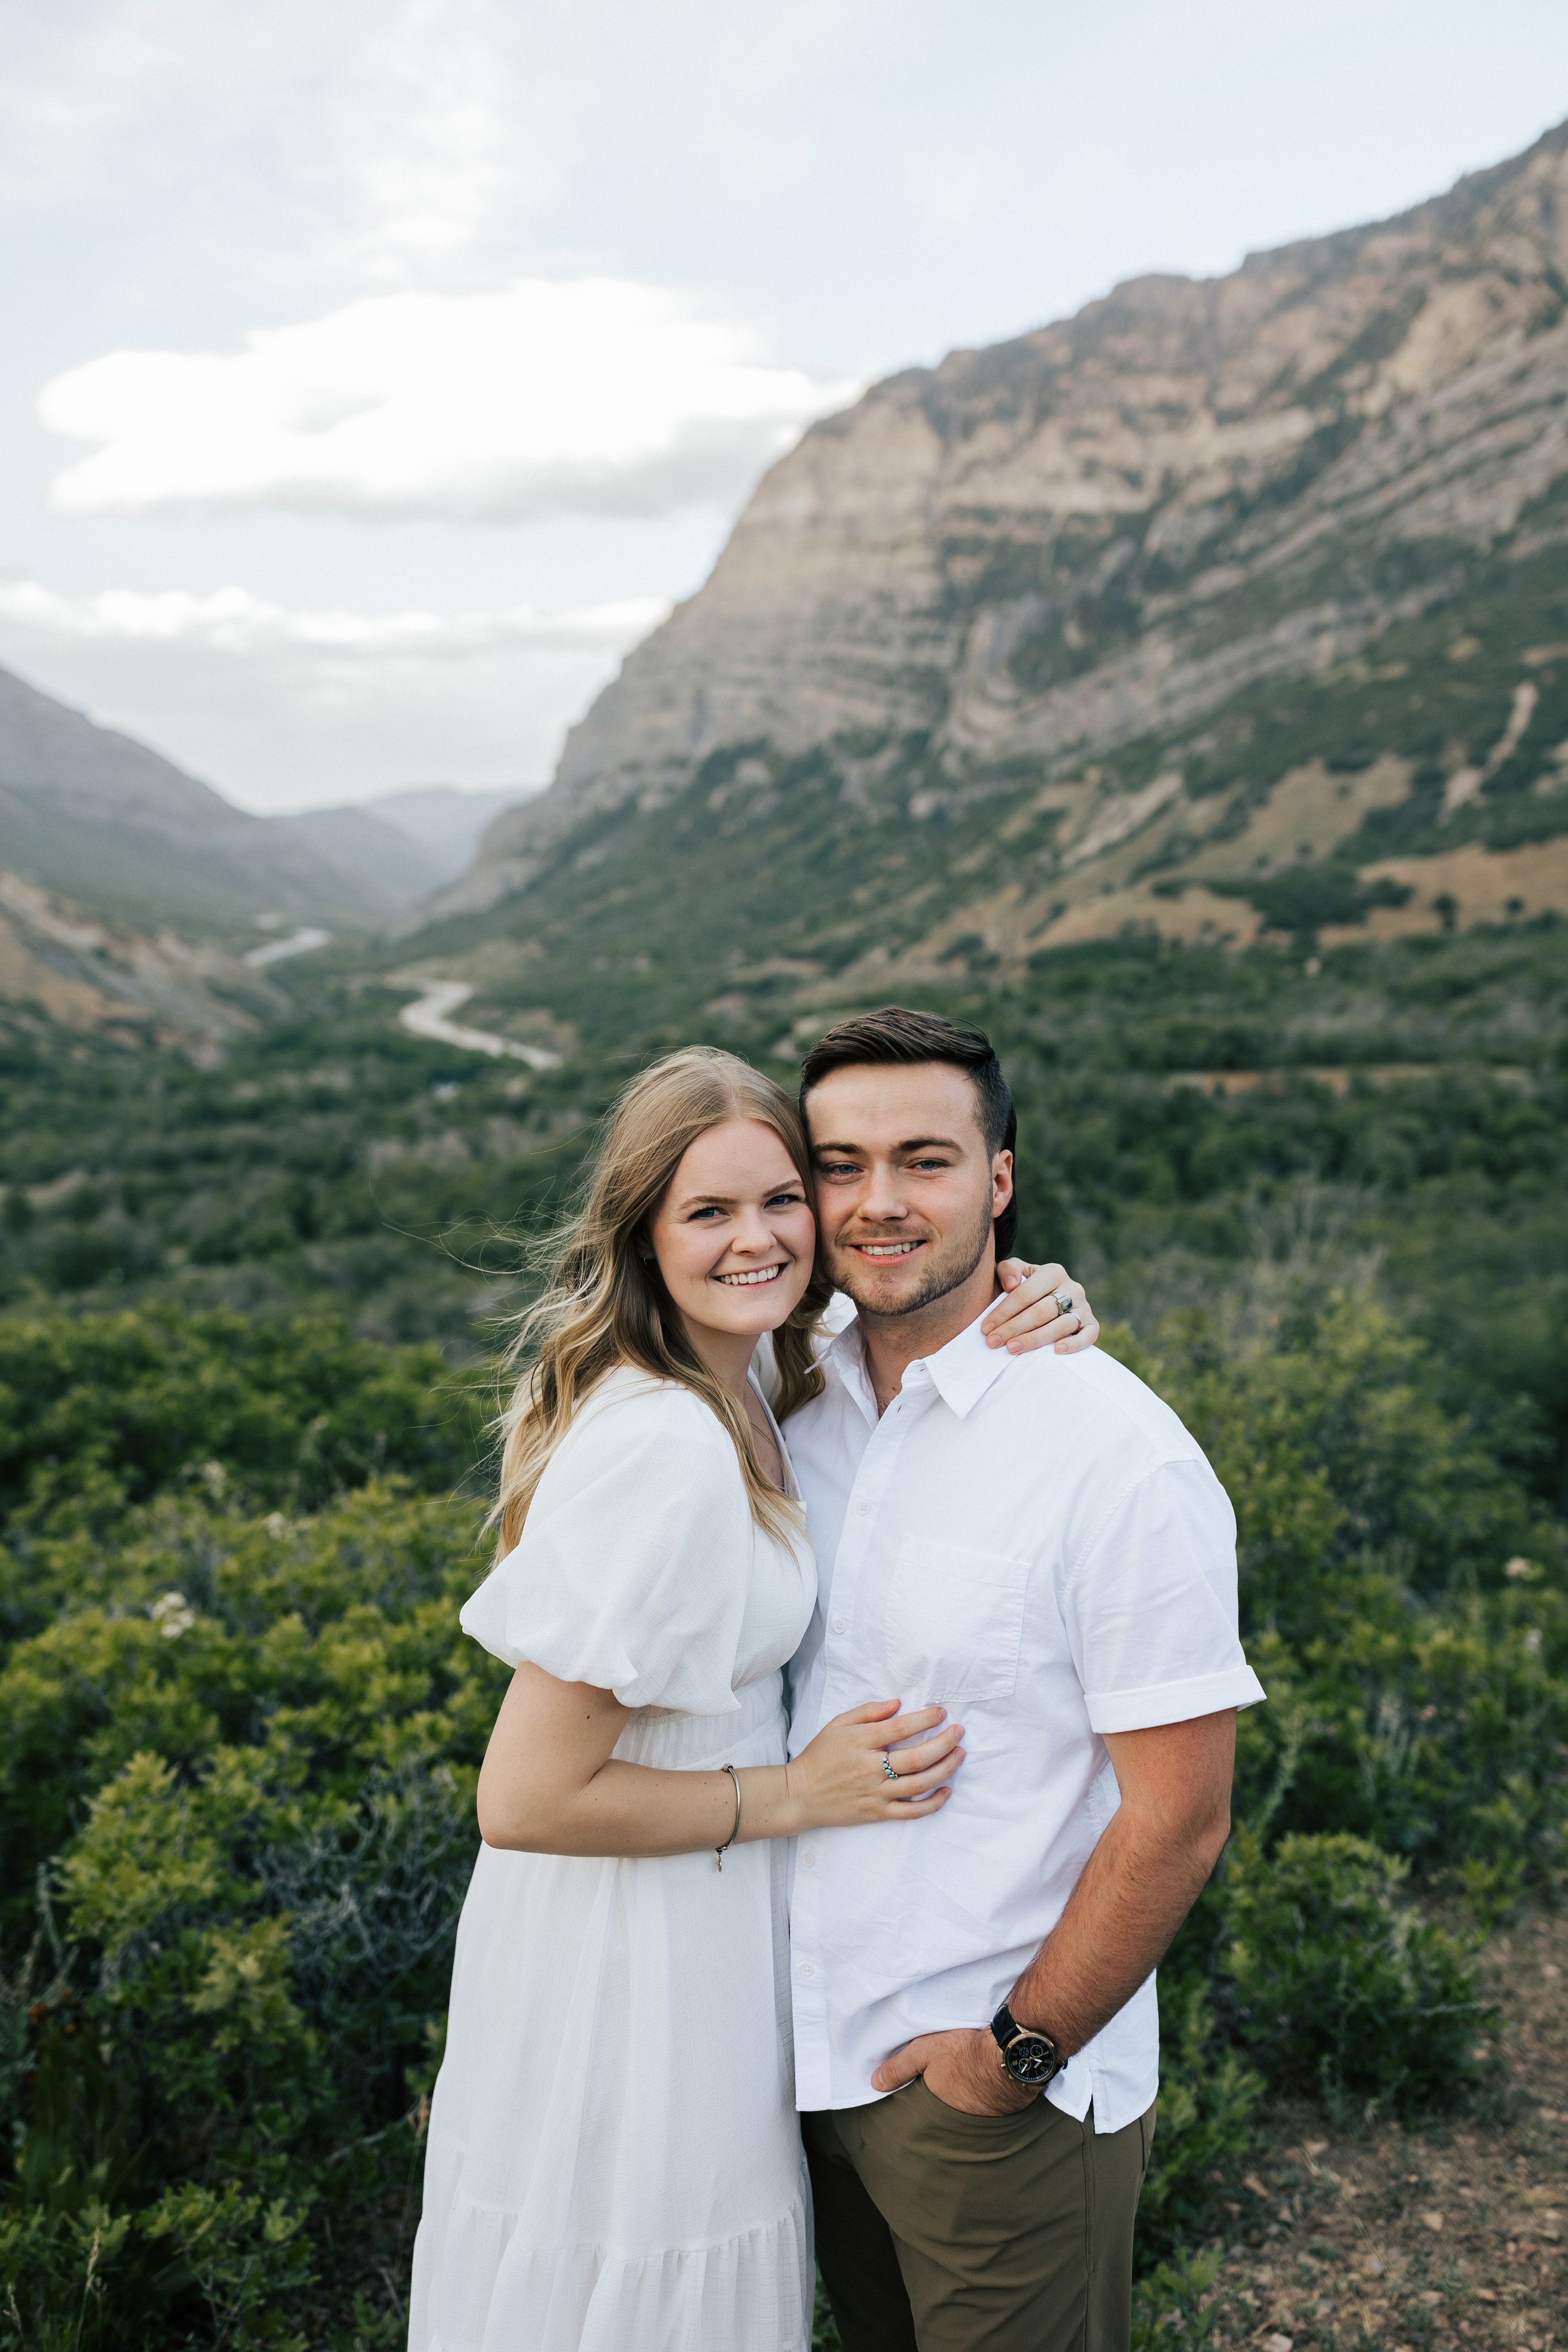  Summer anniversary couples session in the mountains. A young couple smiles at the camera in the mountains with green trees and bushes surrounding them. Utah photographer. Engagement session. #utahphotographer #utahengagements  